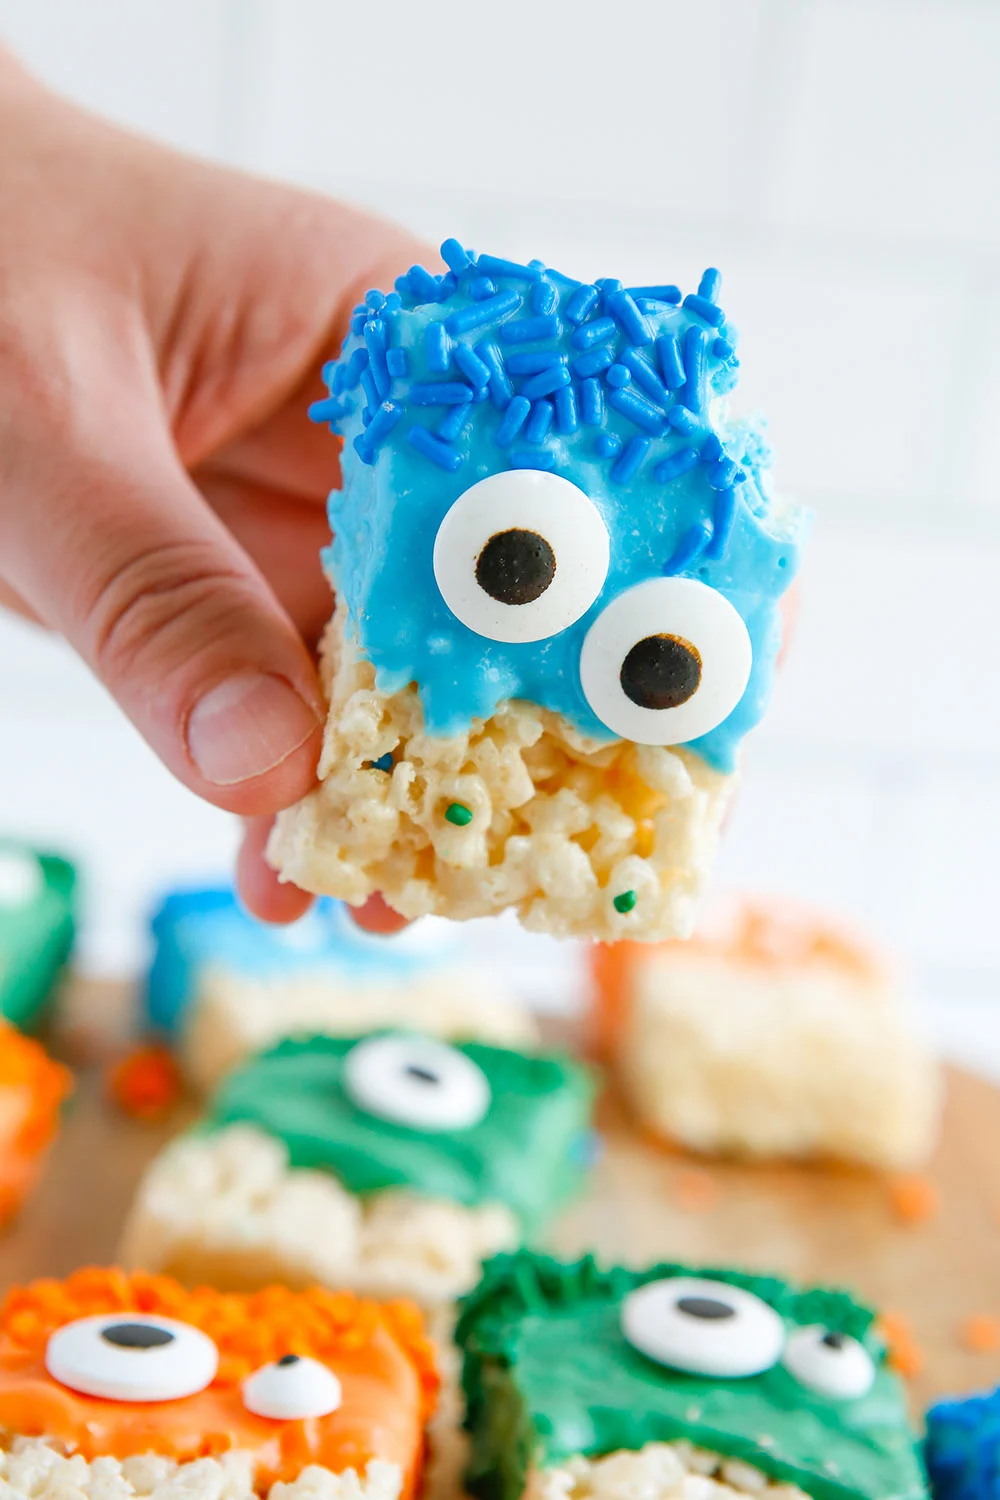 Holding a blue monster rice crispy treat with a bite taken out of it.